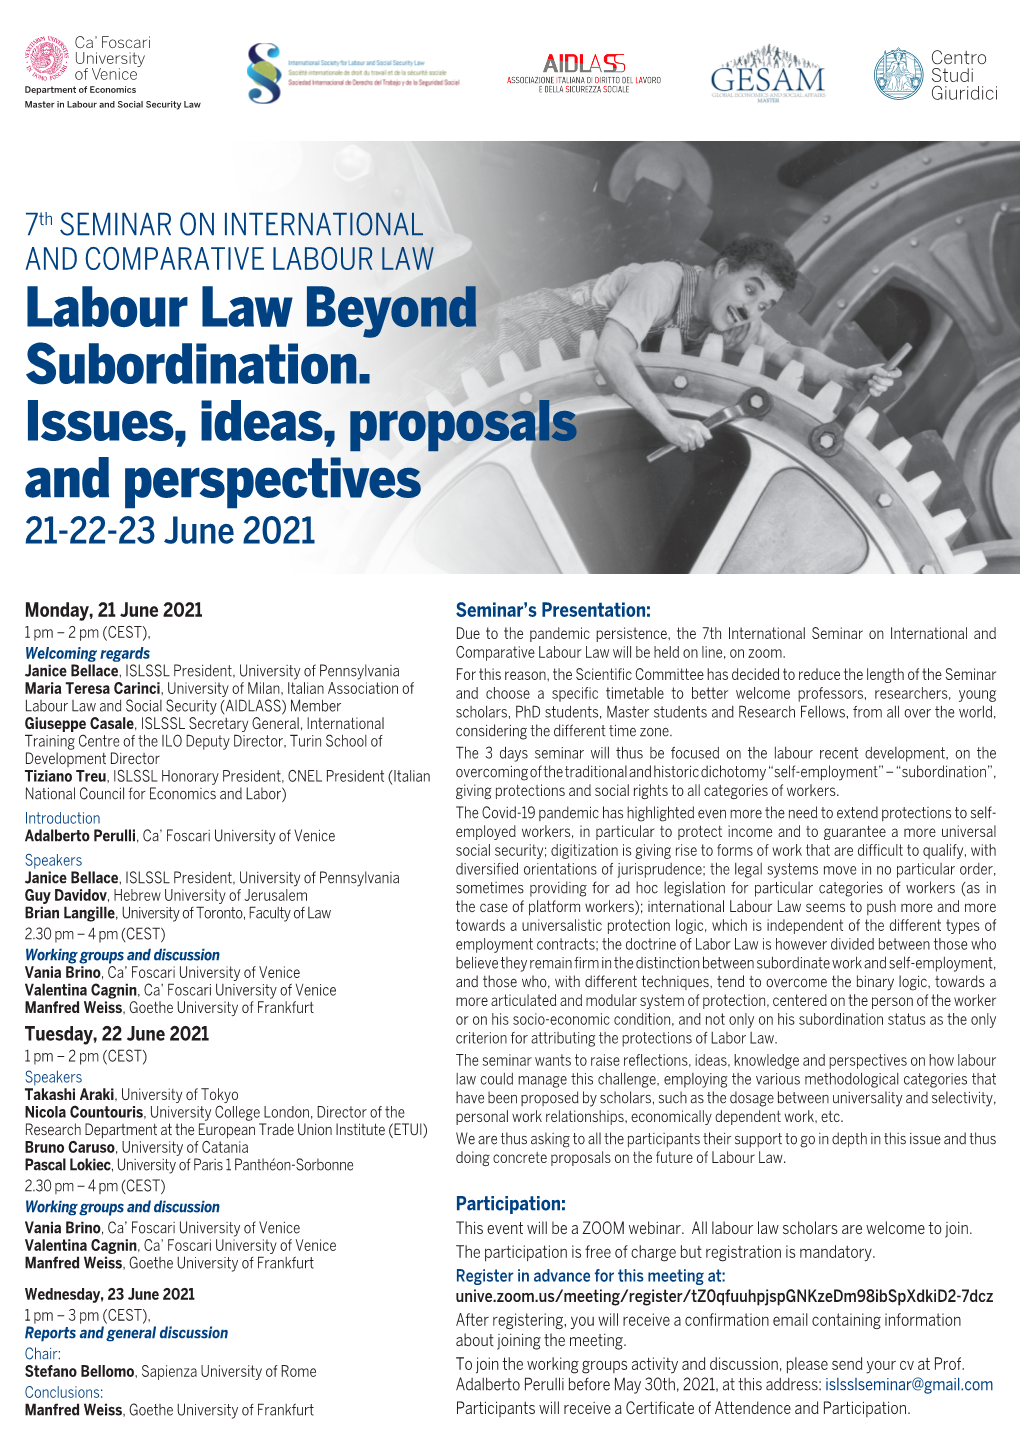 Labour Law Beyond Subordination. Issues, Ideas, Proposals and Perspectives 21-22-23 June 2021